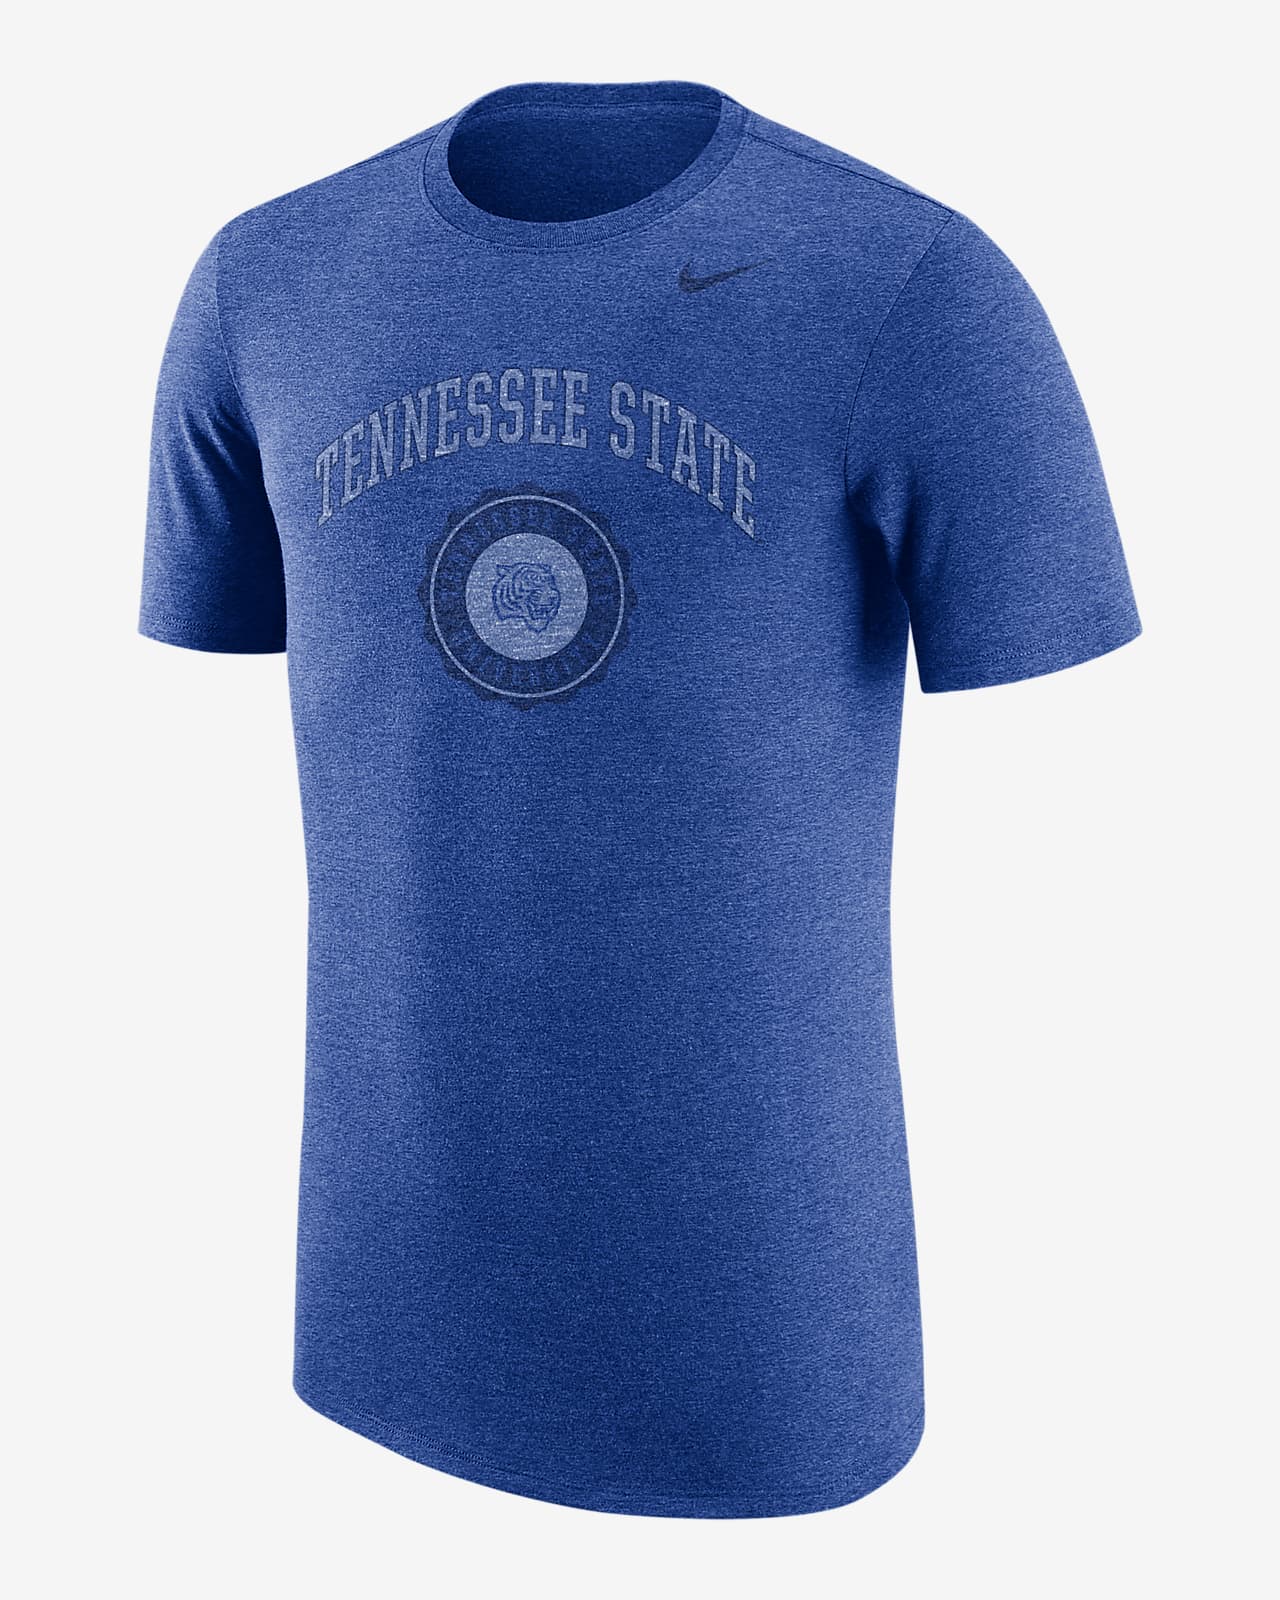 Nike College (Tennessee State) Men's T-Shirt